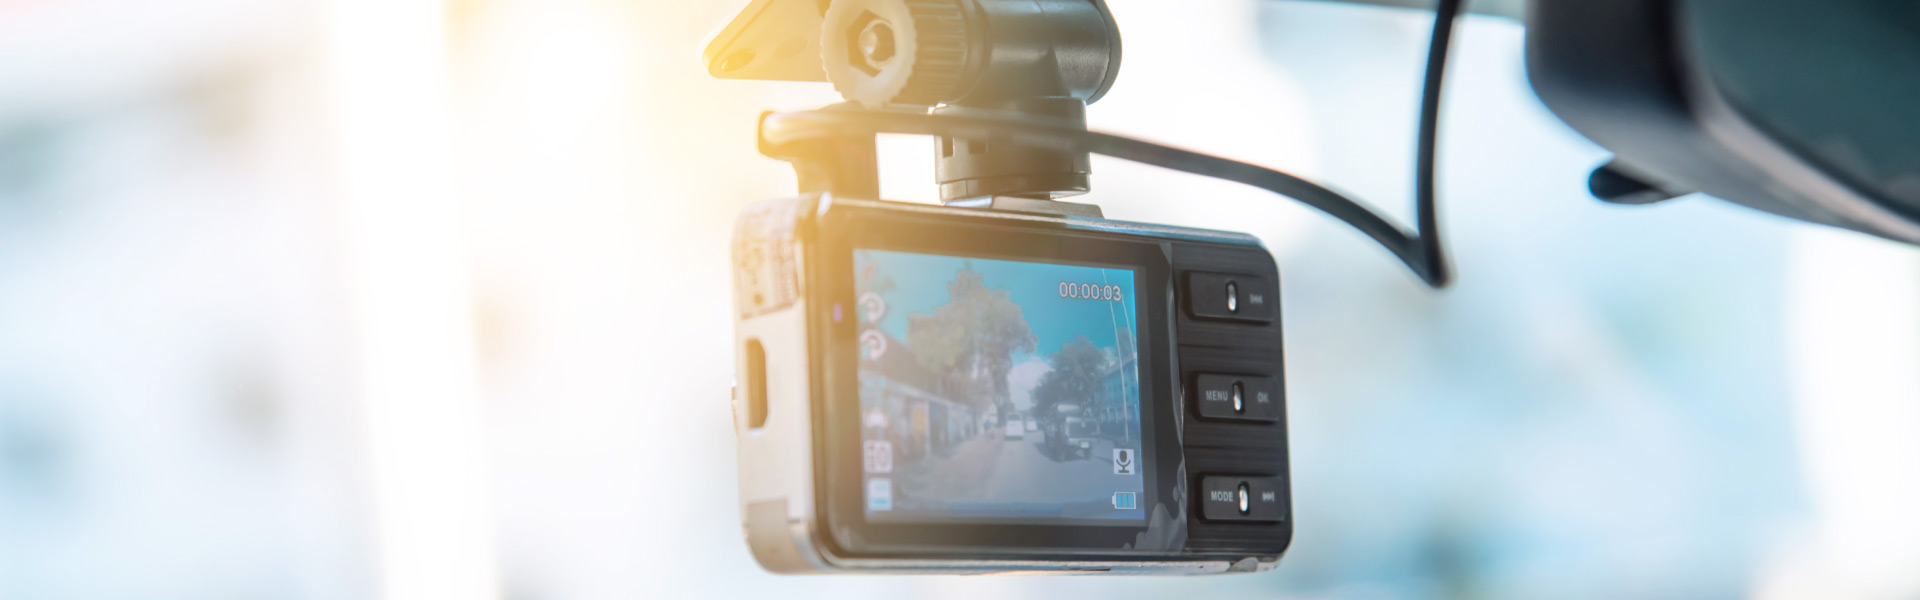 Dash cams: their growth, effectiveness and future in a rapidly